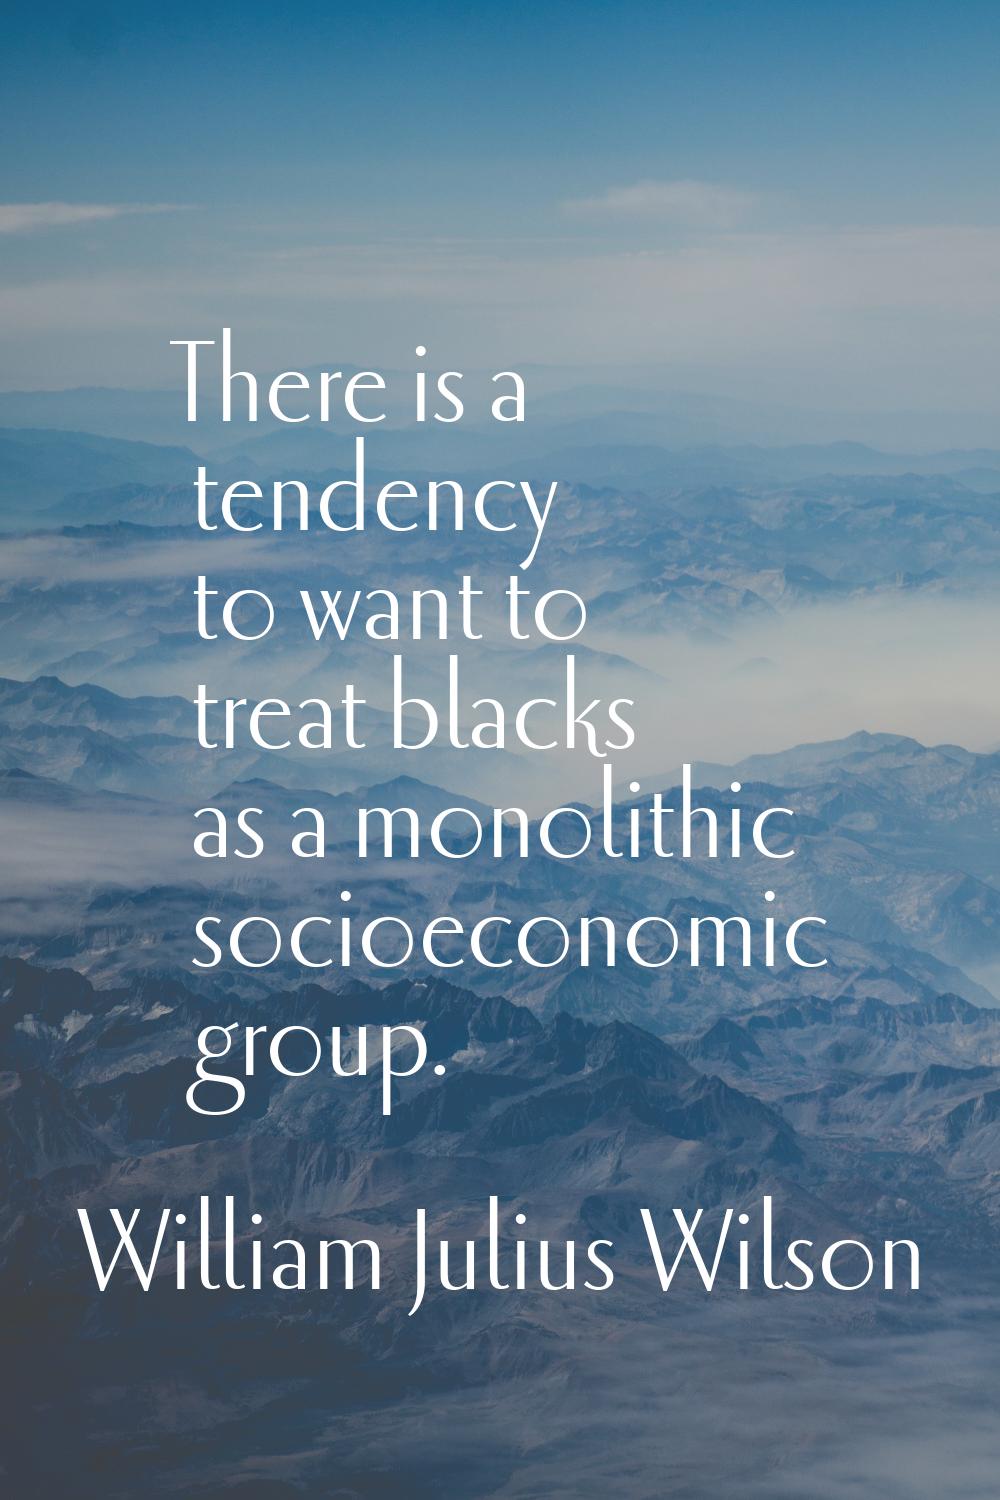 There is a tendency to want to treat blacks as a monolithic socioeconomic group.